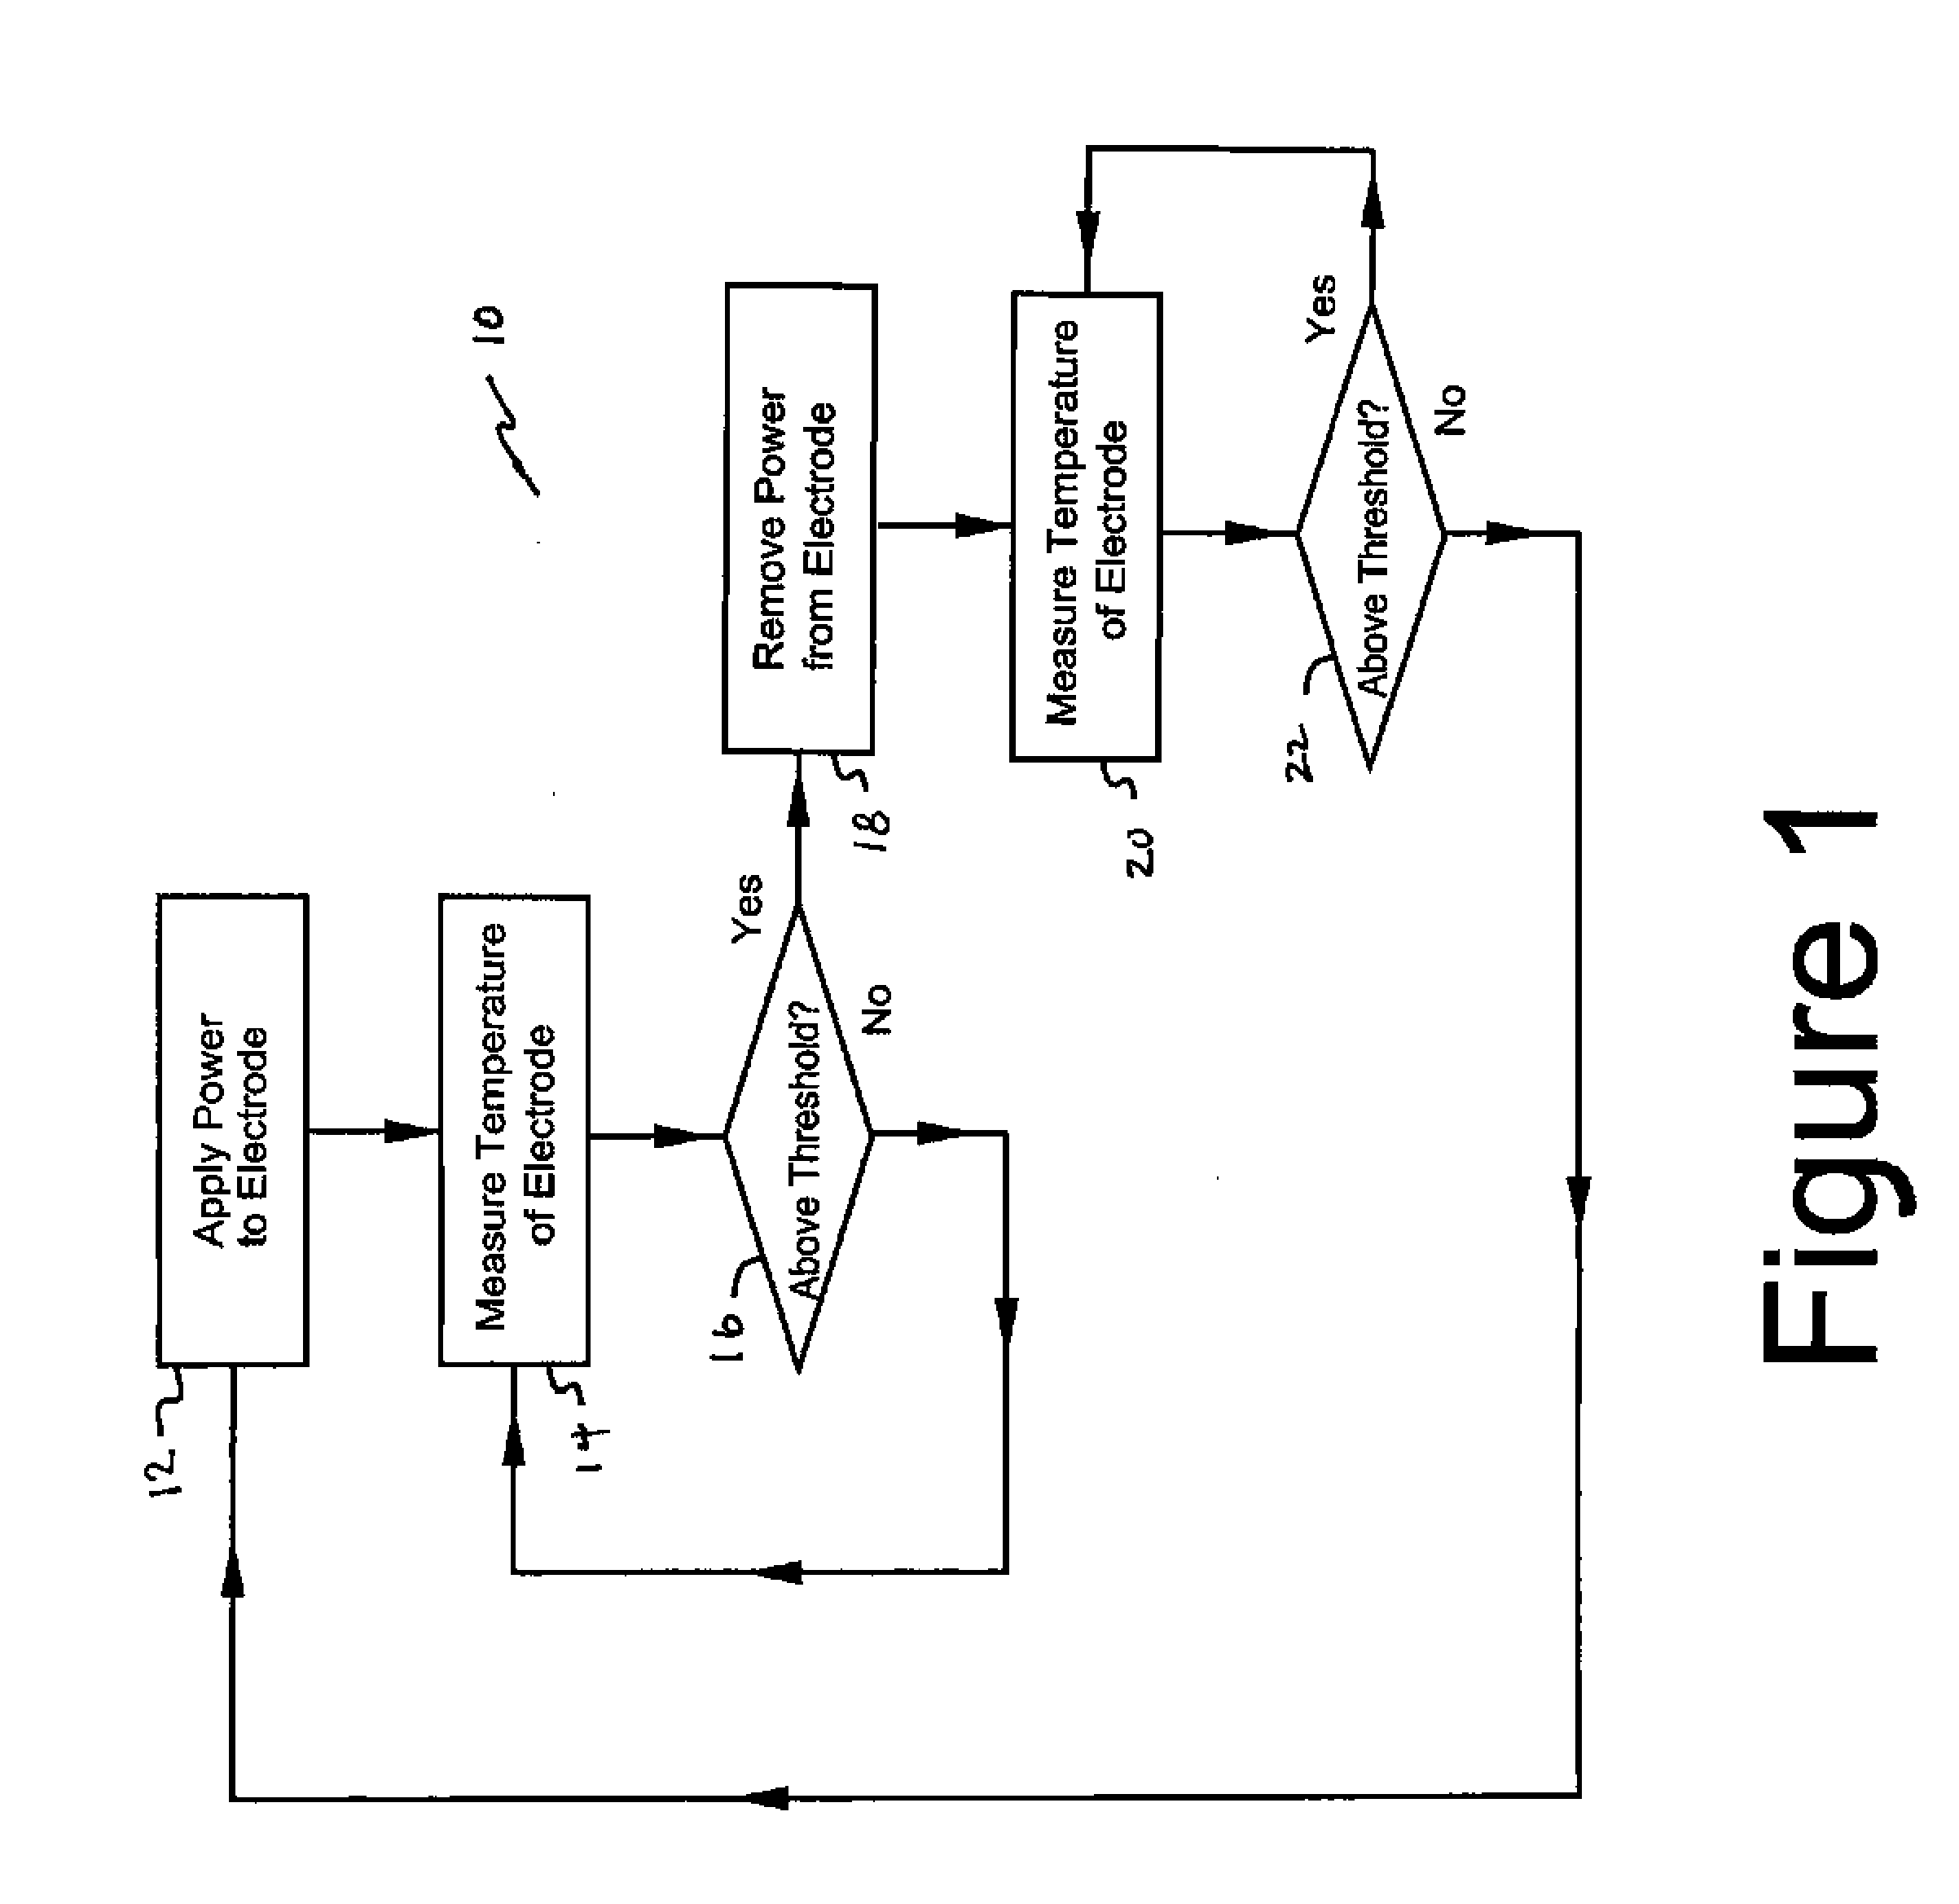 Impedance responsive ablation RF driving for moderating return electrode temperature